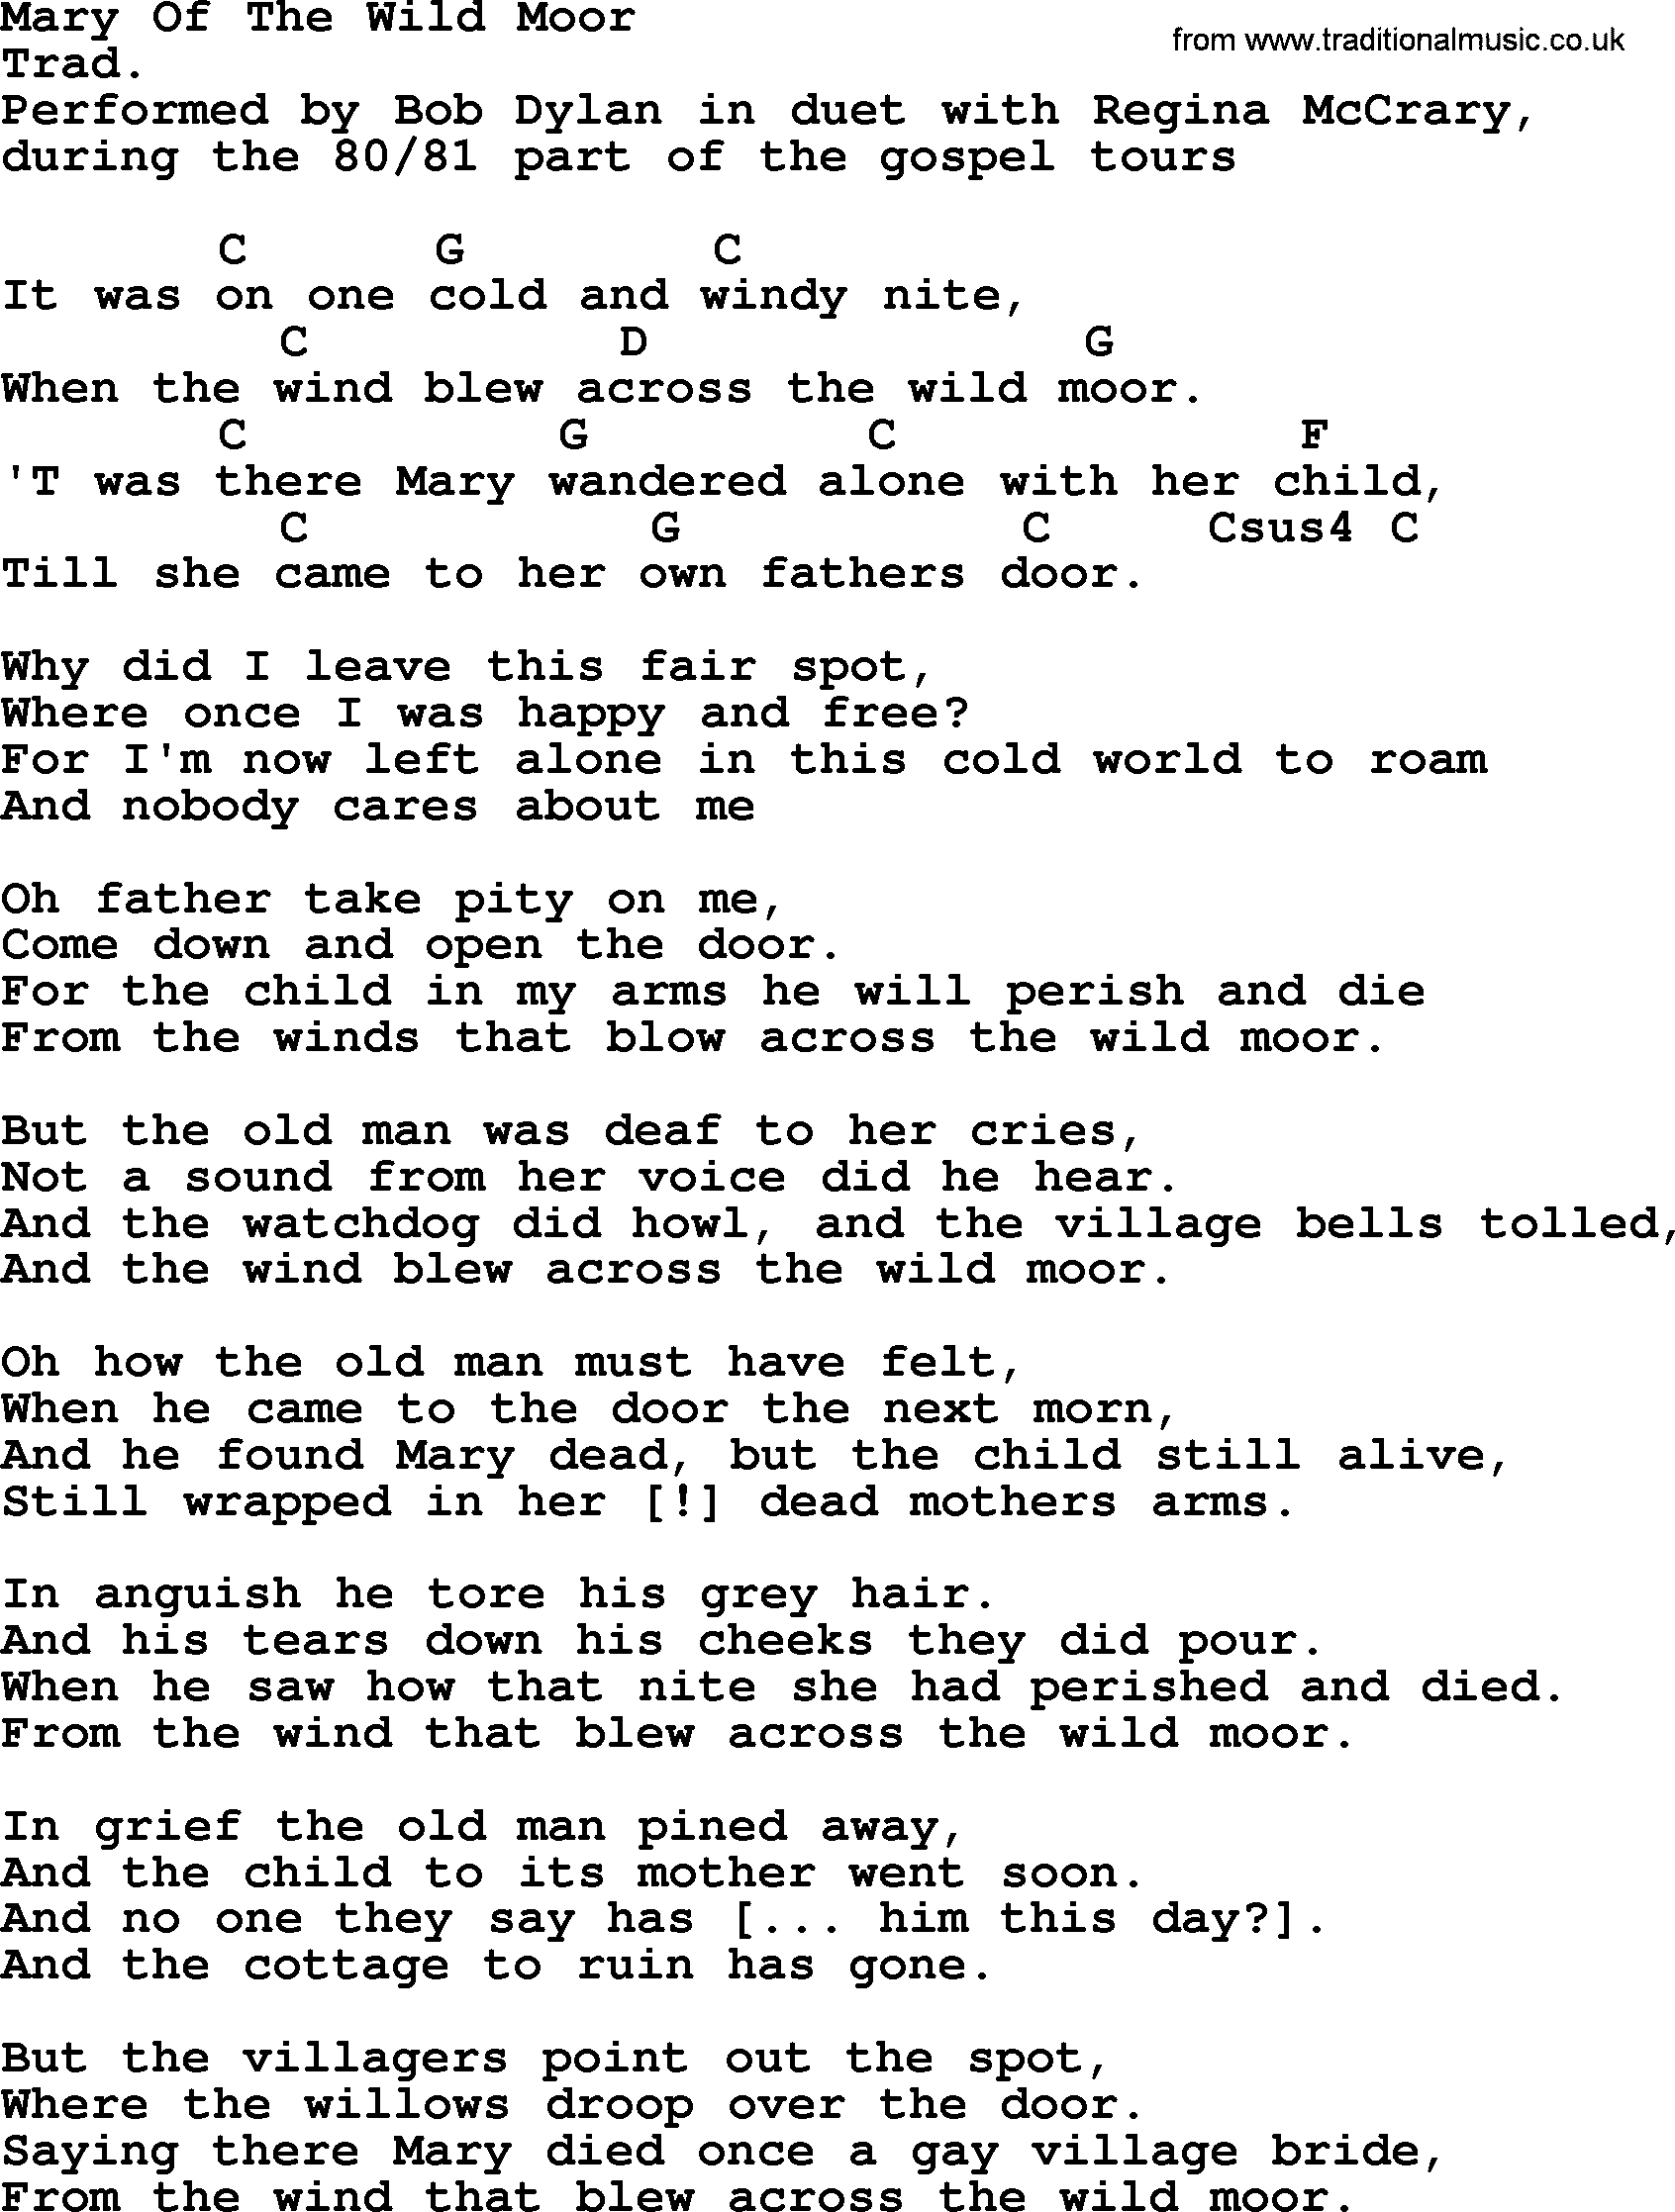 Bob Dylan song, lyrics with chords - Mary Of The Wild Moor